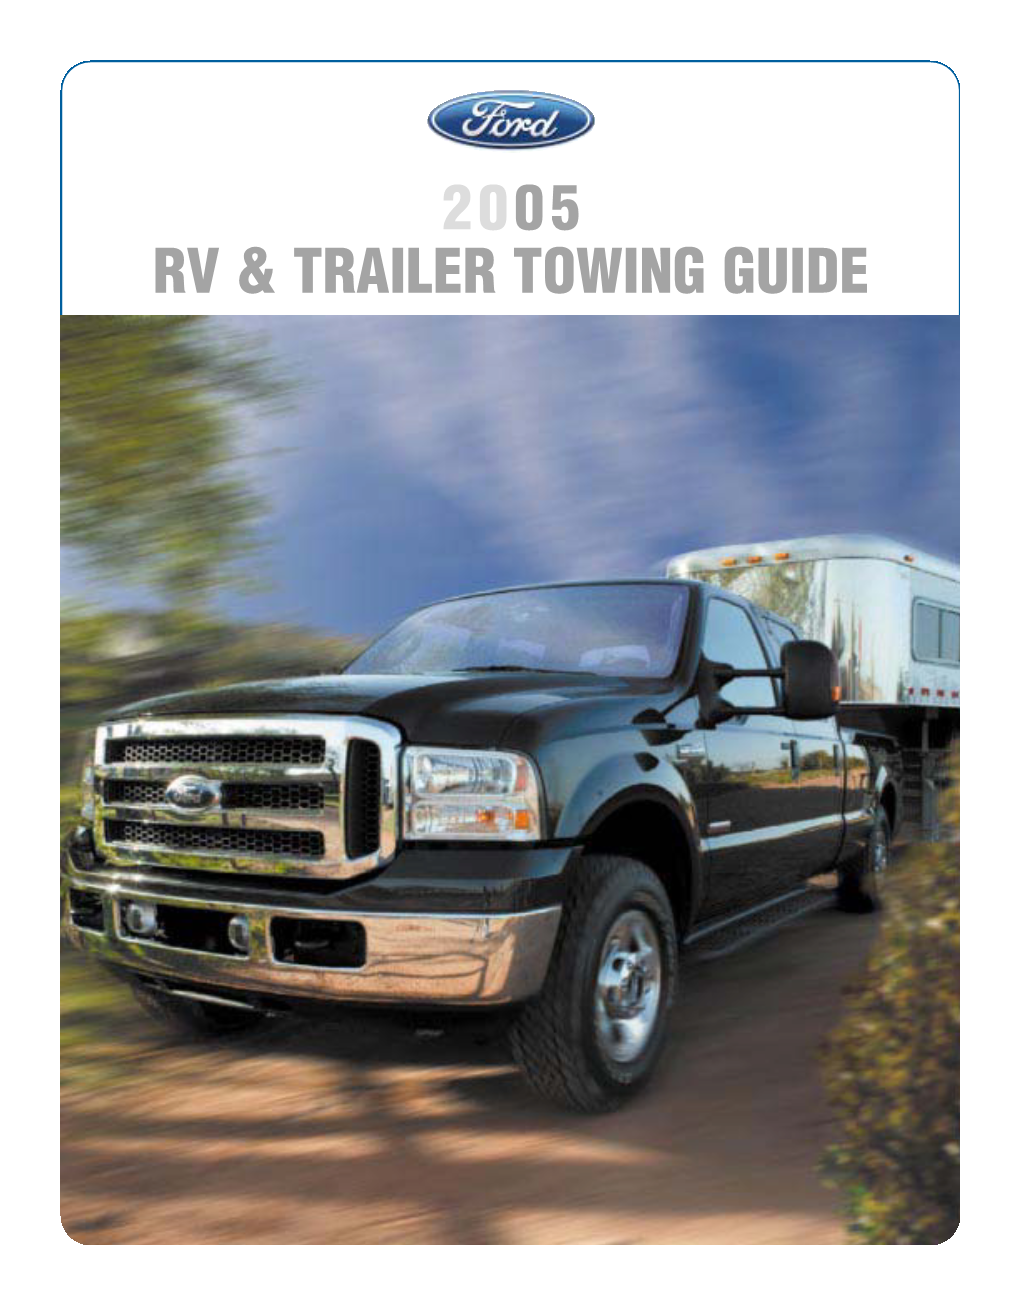 2005 Rv & Trailer Towing Guide